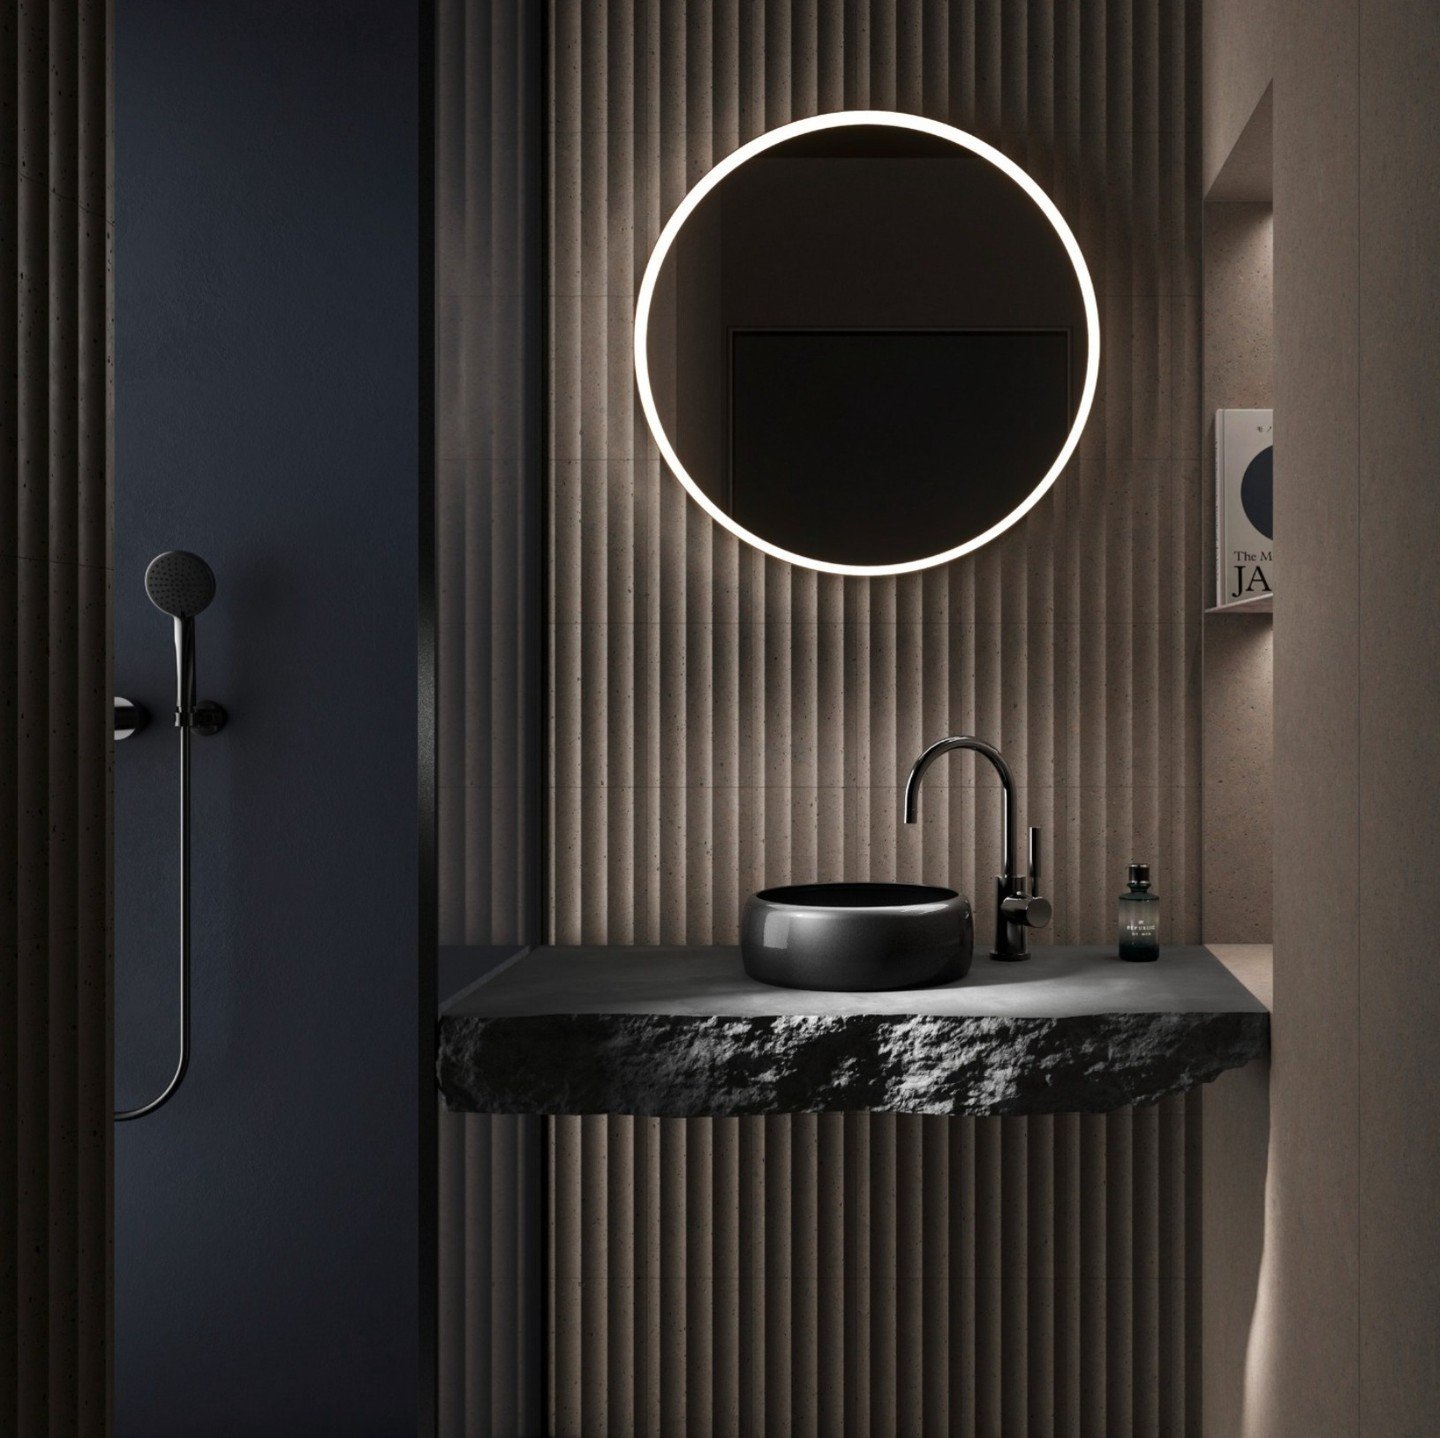 Sink into sophistication with the BetteCurve &mdash; a statement of pure design and unmatched refinement for your bathroom sanctuary. 🖤🌟 ⁠
⁠
The BetteCurve combines artistic design and practical functionality, inspired by smoothly polished pebbles.